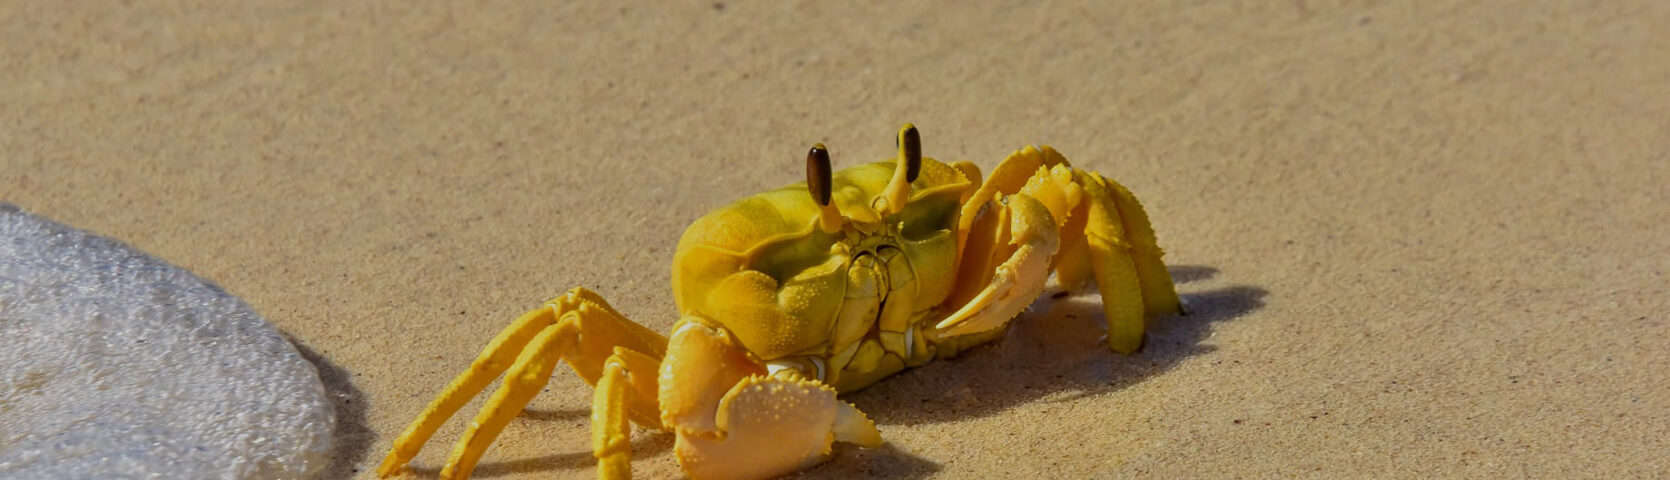 West-Coast-Abrolhos-Voyage-Yellow-Ghost-Crab